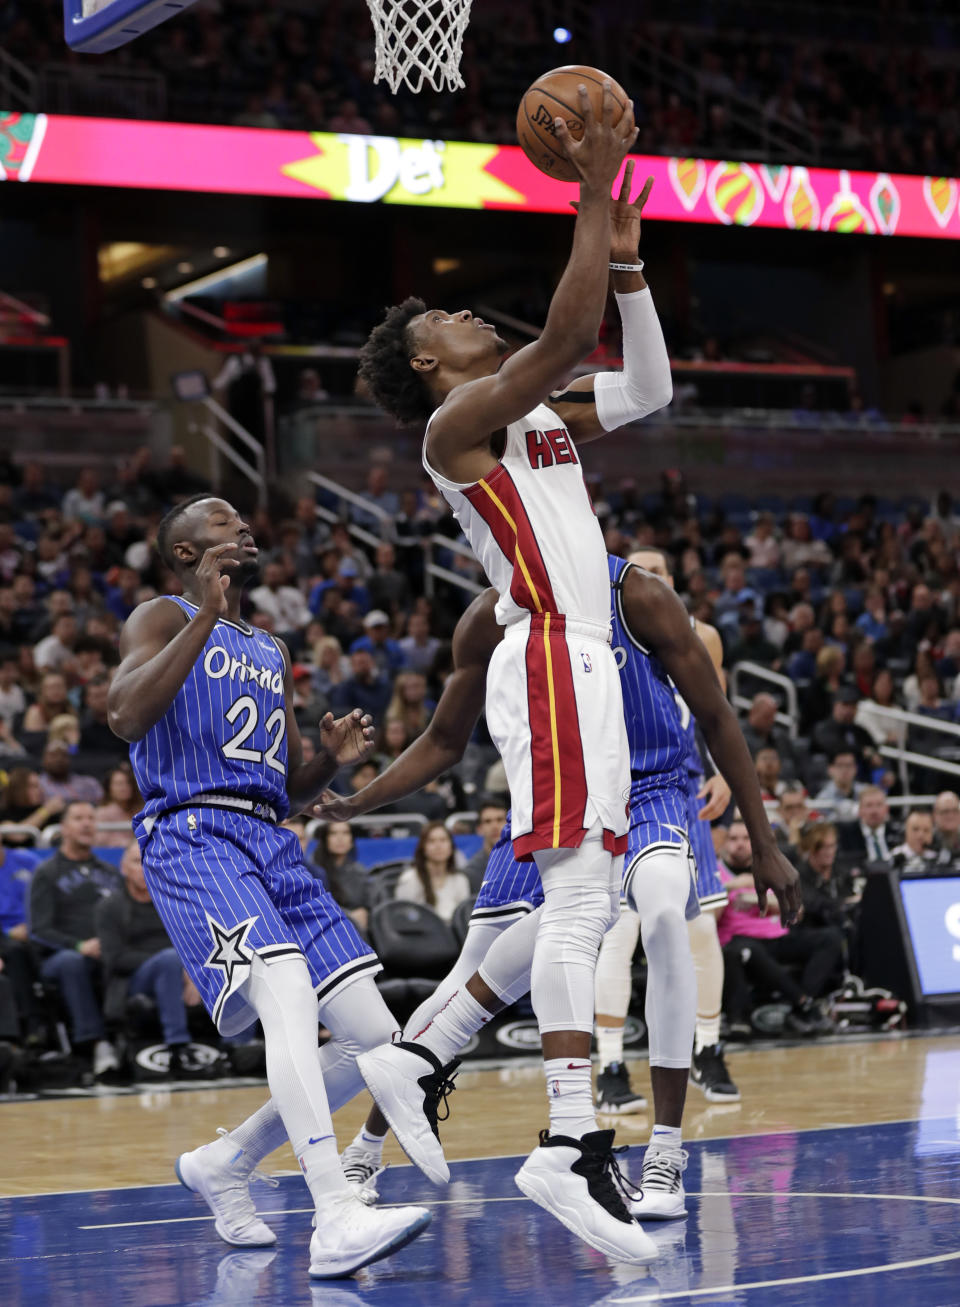 Miami Heat's Josh Richardson, front right, takes a shot in front of Orlando Magic's Jerian Grant (22) during the first half of an NBA basketball game, Sunday, Dec. 23, 2018, in Orlando, Fla. (AP Photo/John Raoux)